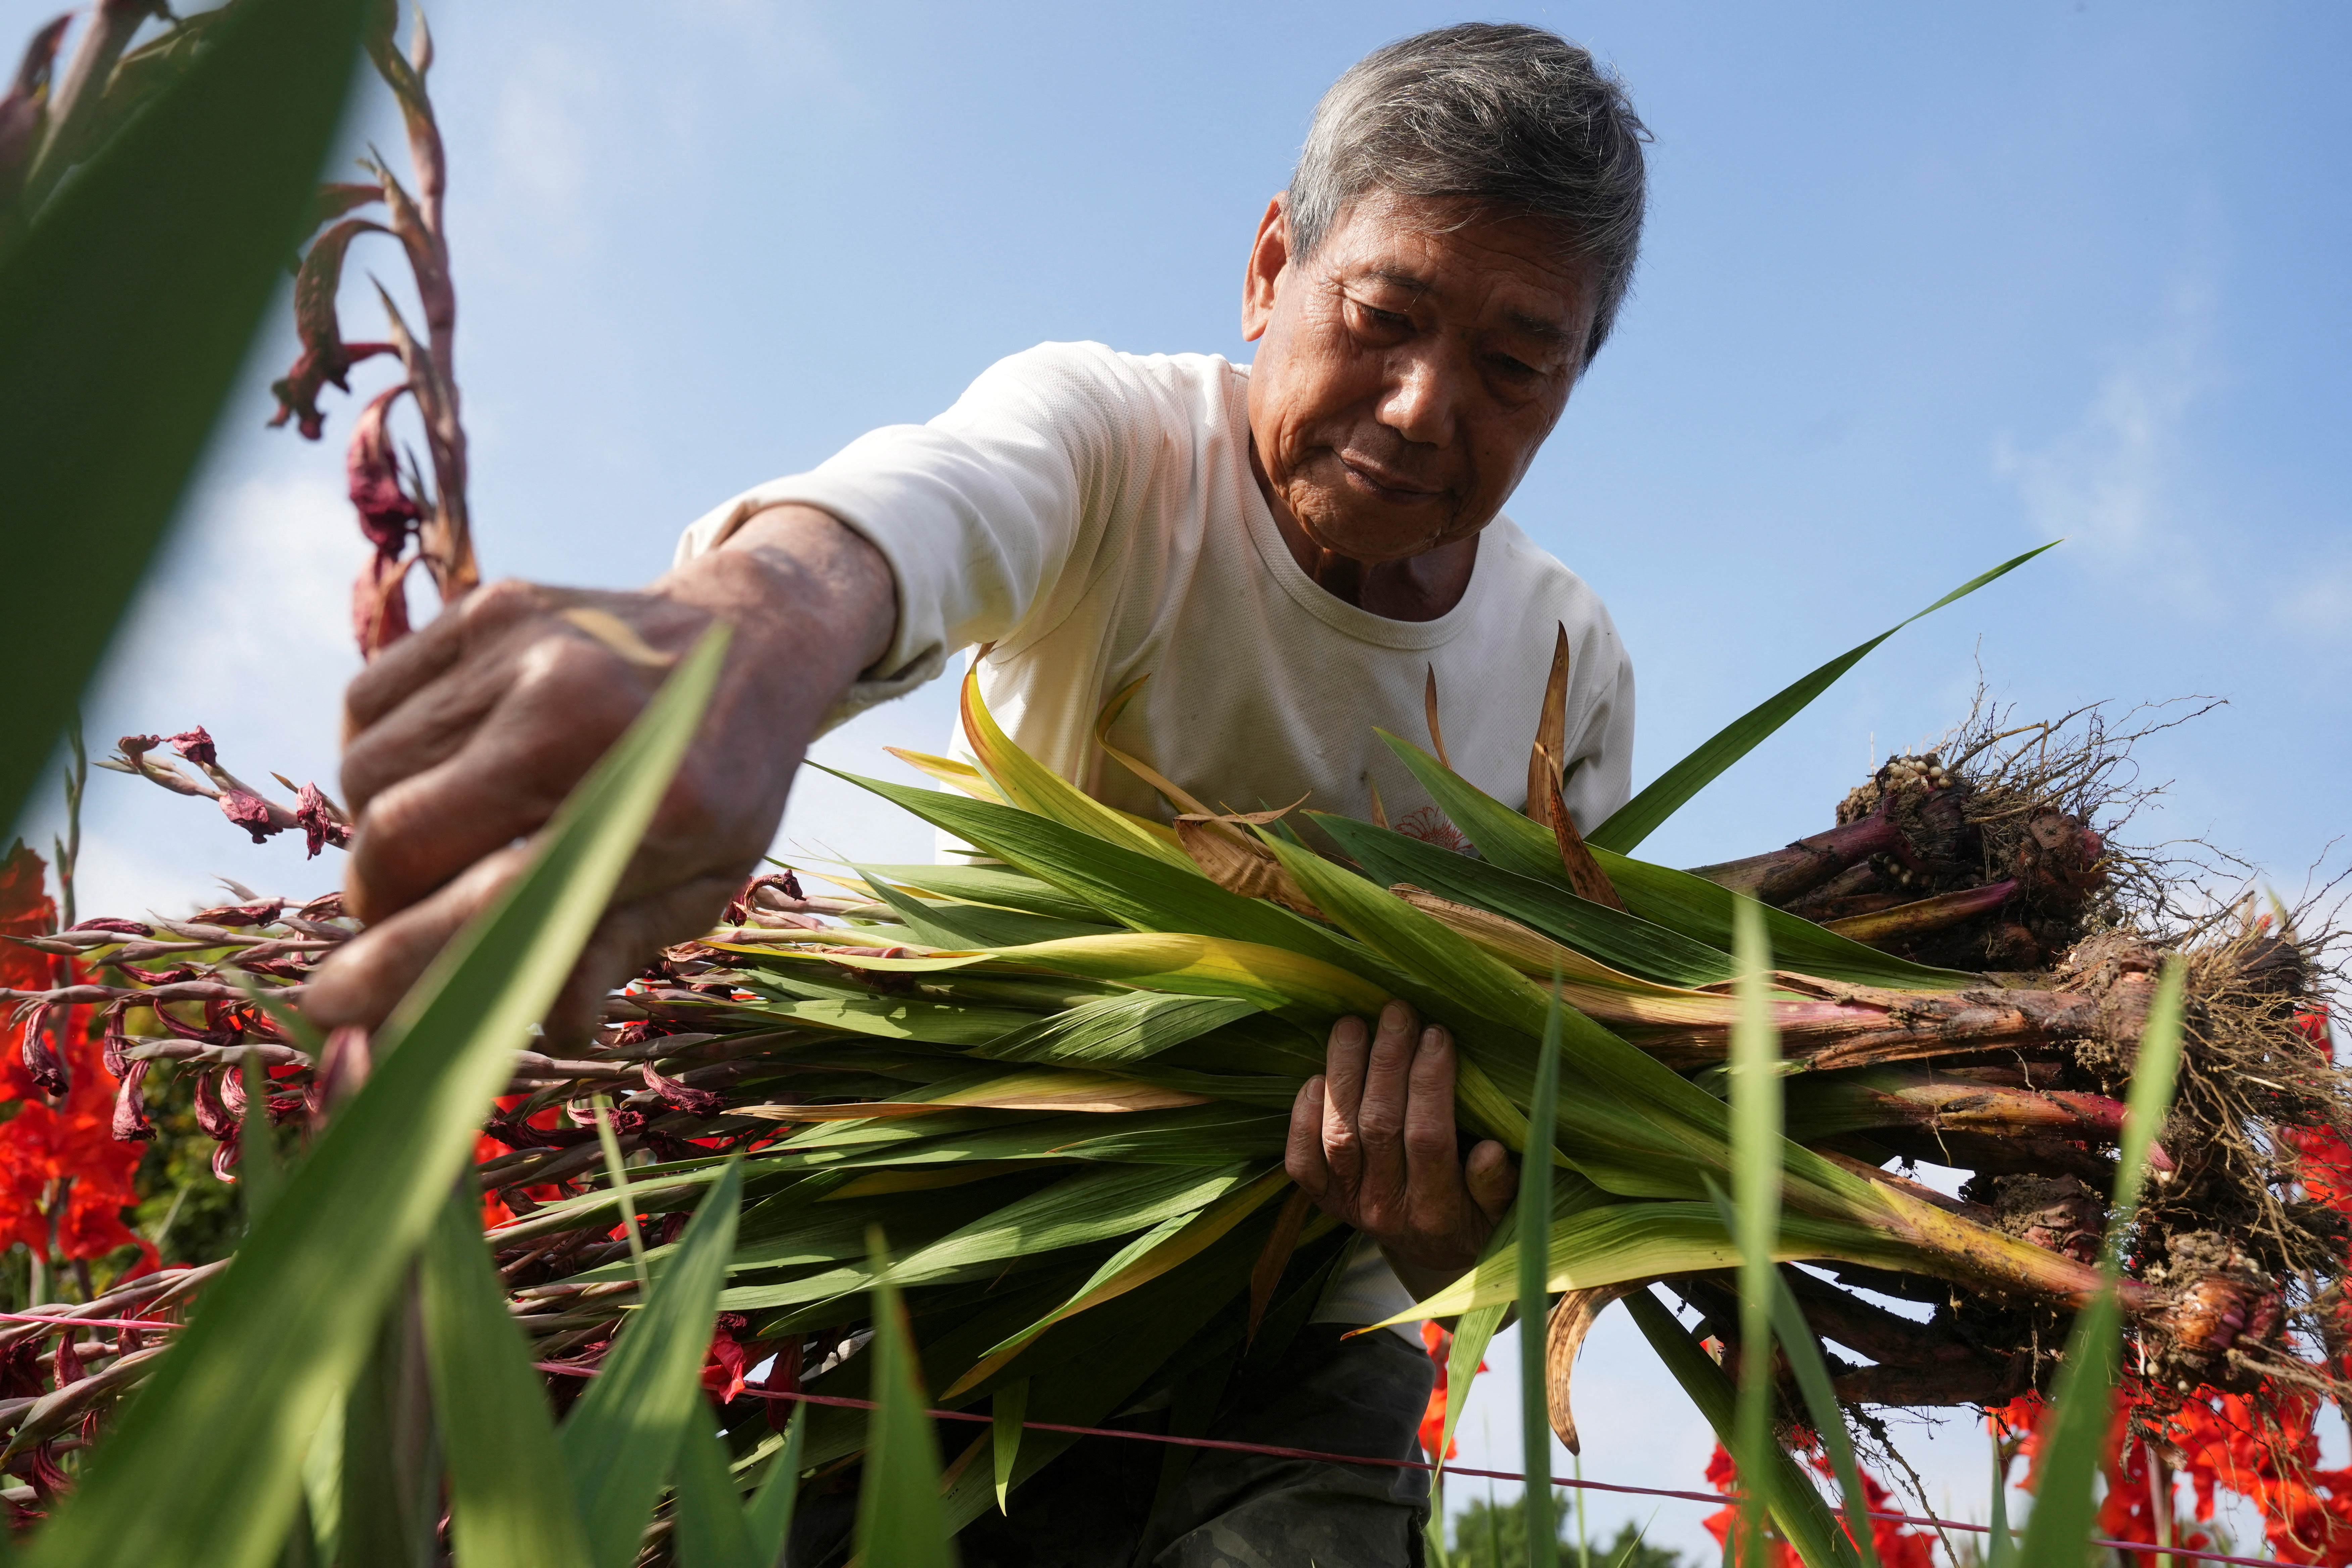 Flower farmer Leung Yat-Shen picks withered sword lilies at his farm in Hong Kong